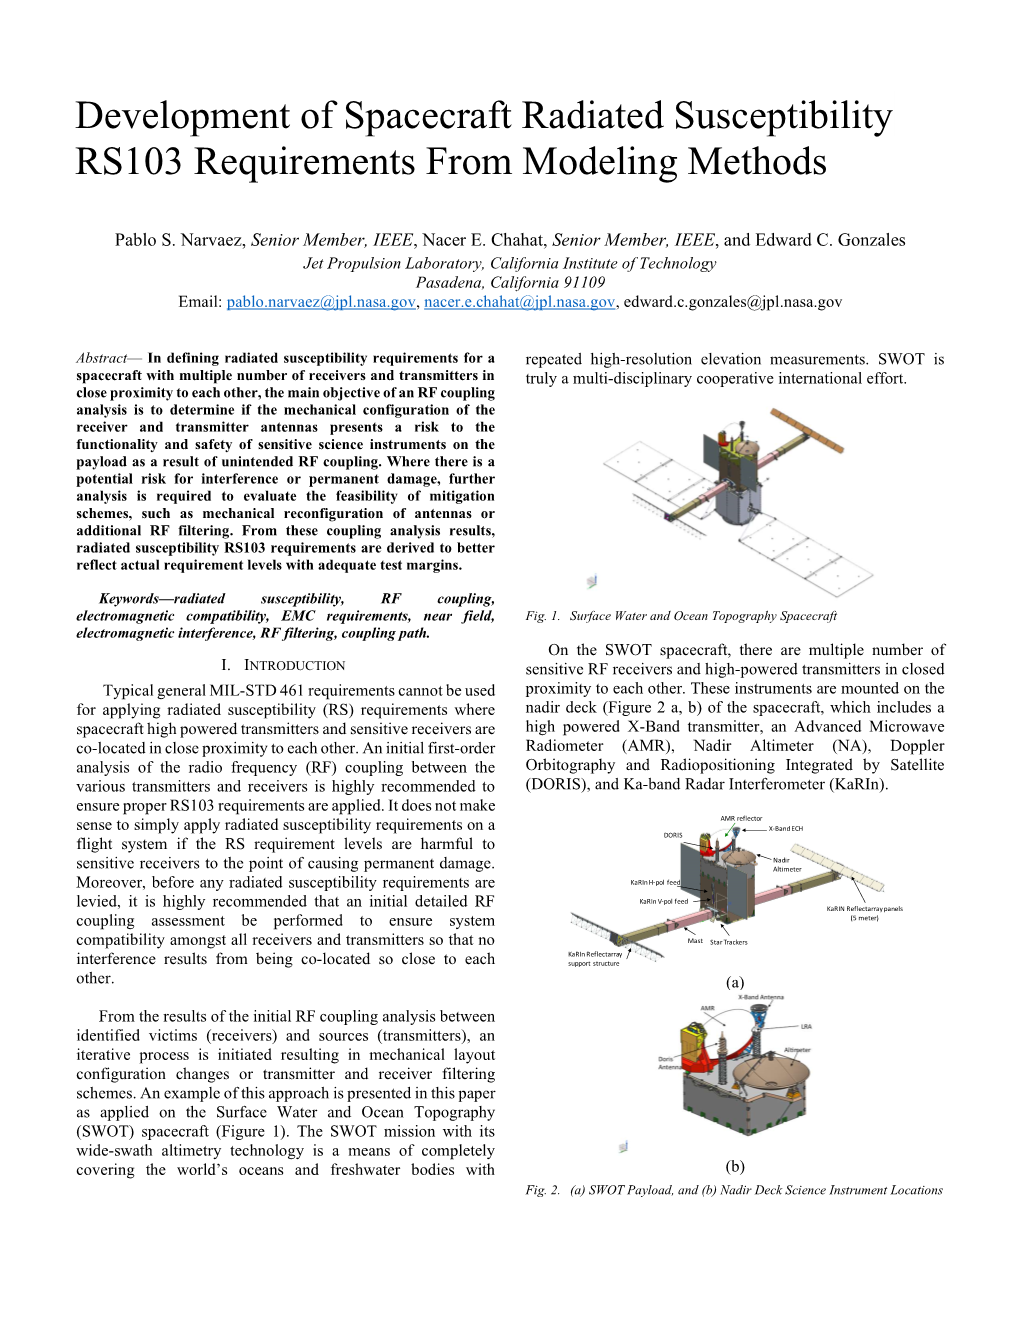 Development of Spacecraft Radiated Susceptibility RS103 Requirements from Modeling Methods